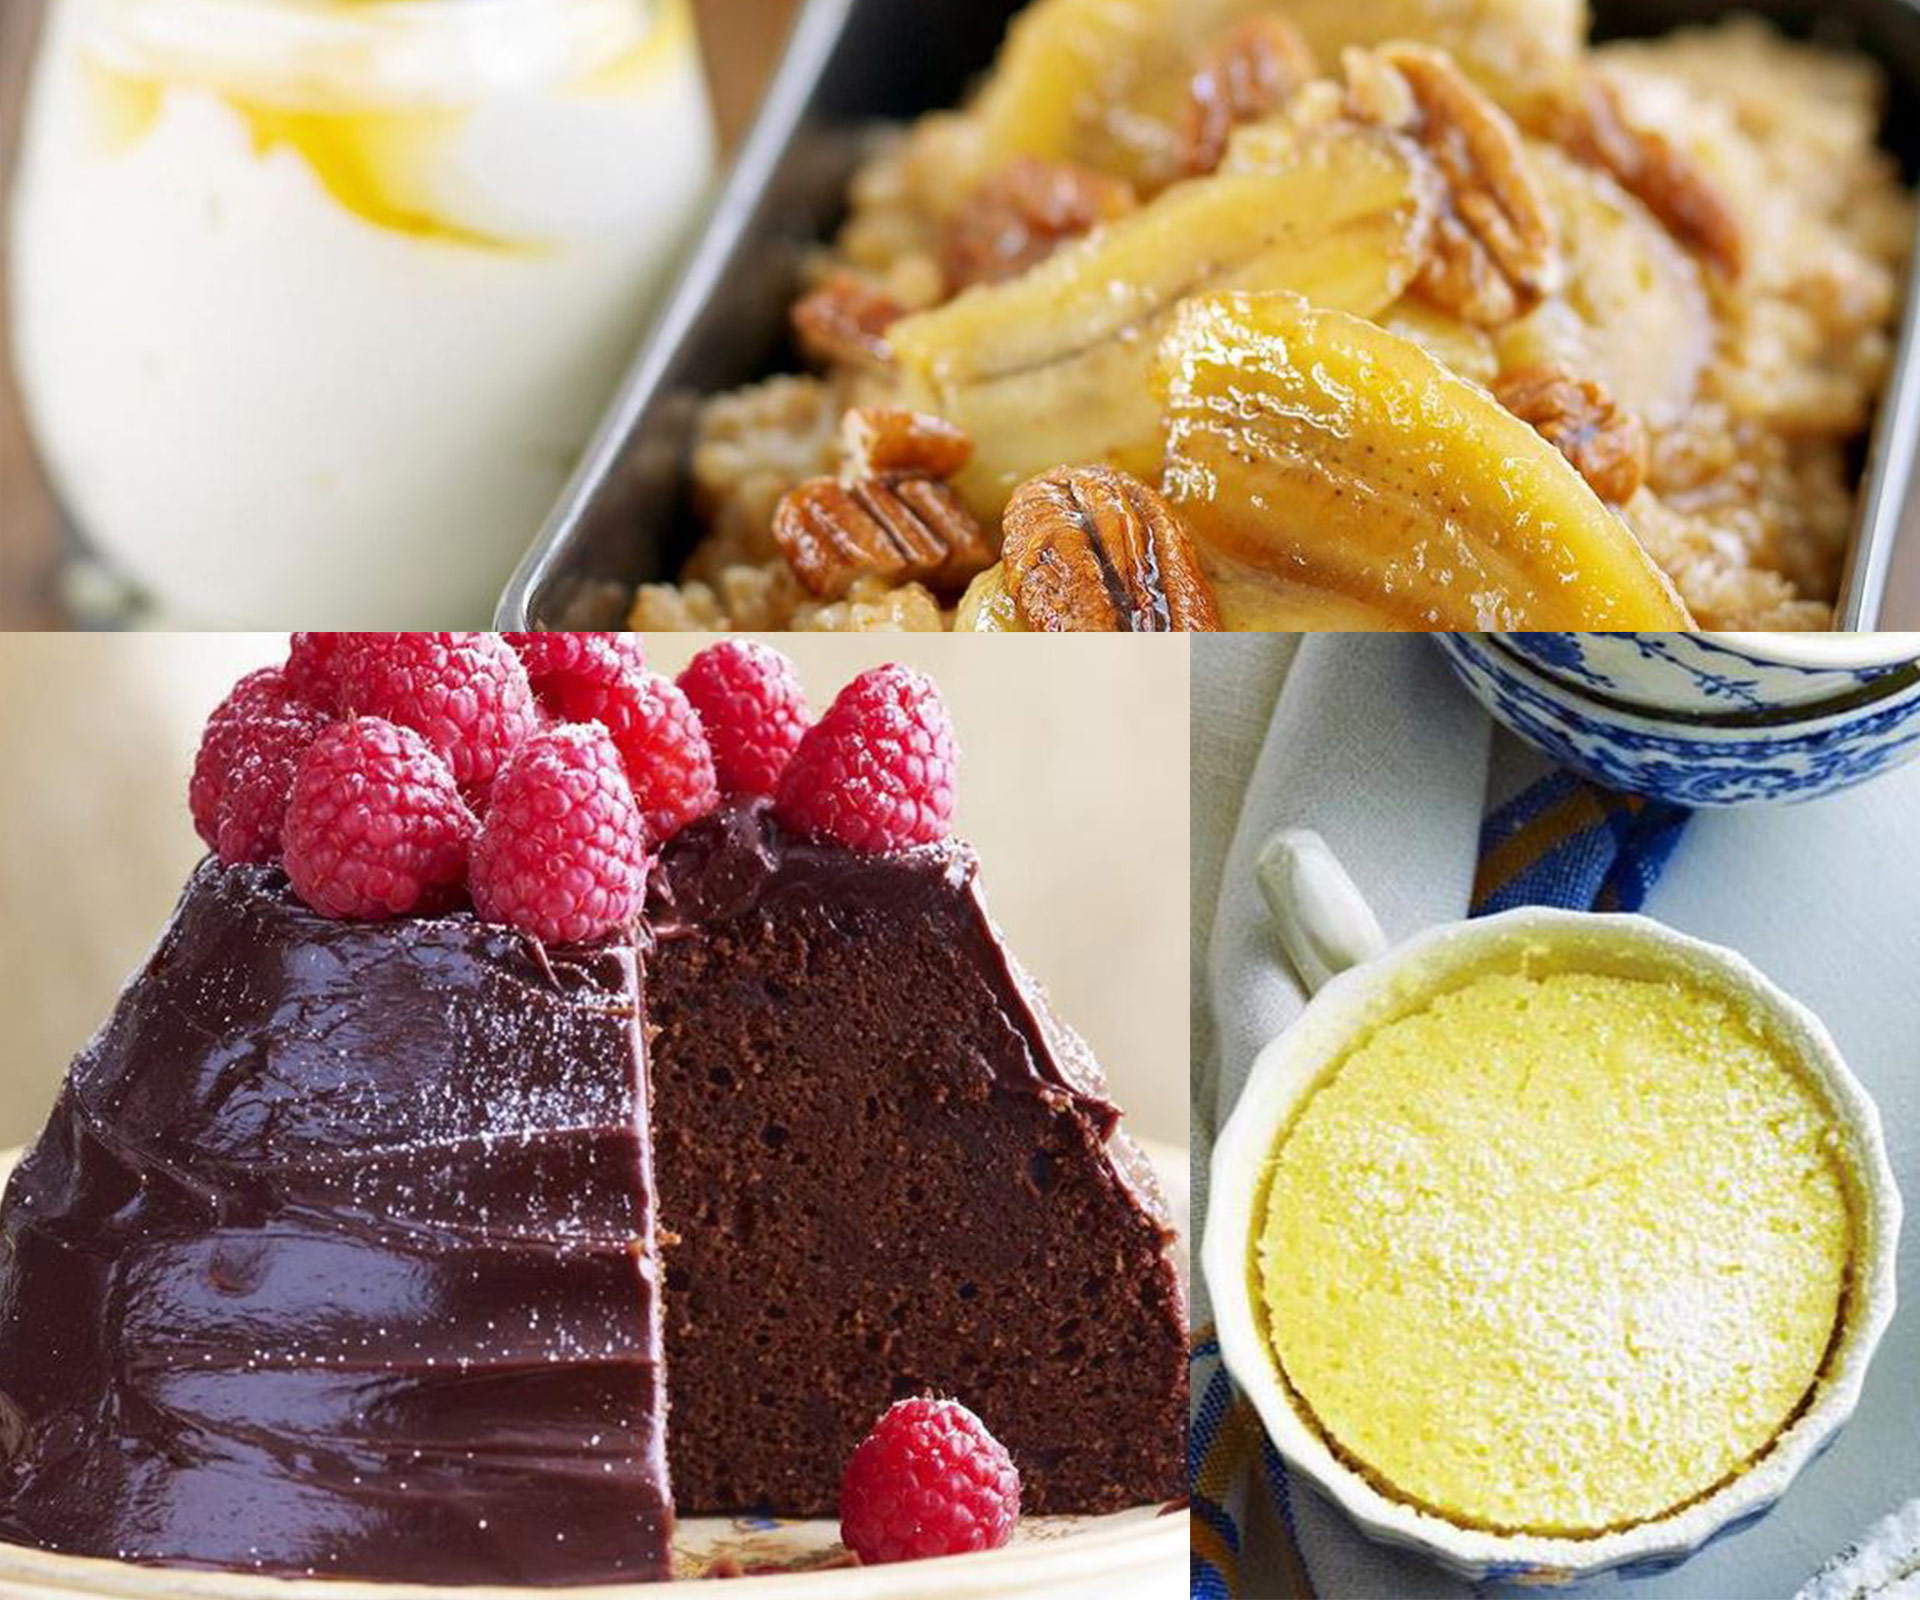 Slow cooker recipes: 5 of the best ever slow cooker desserts